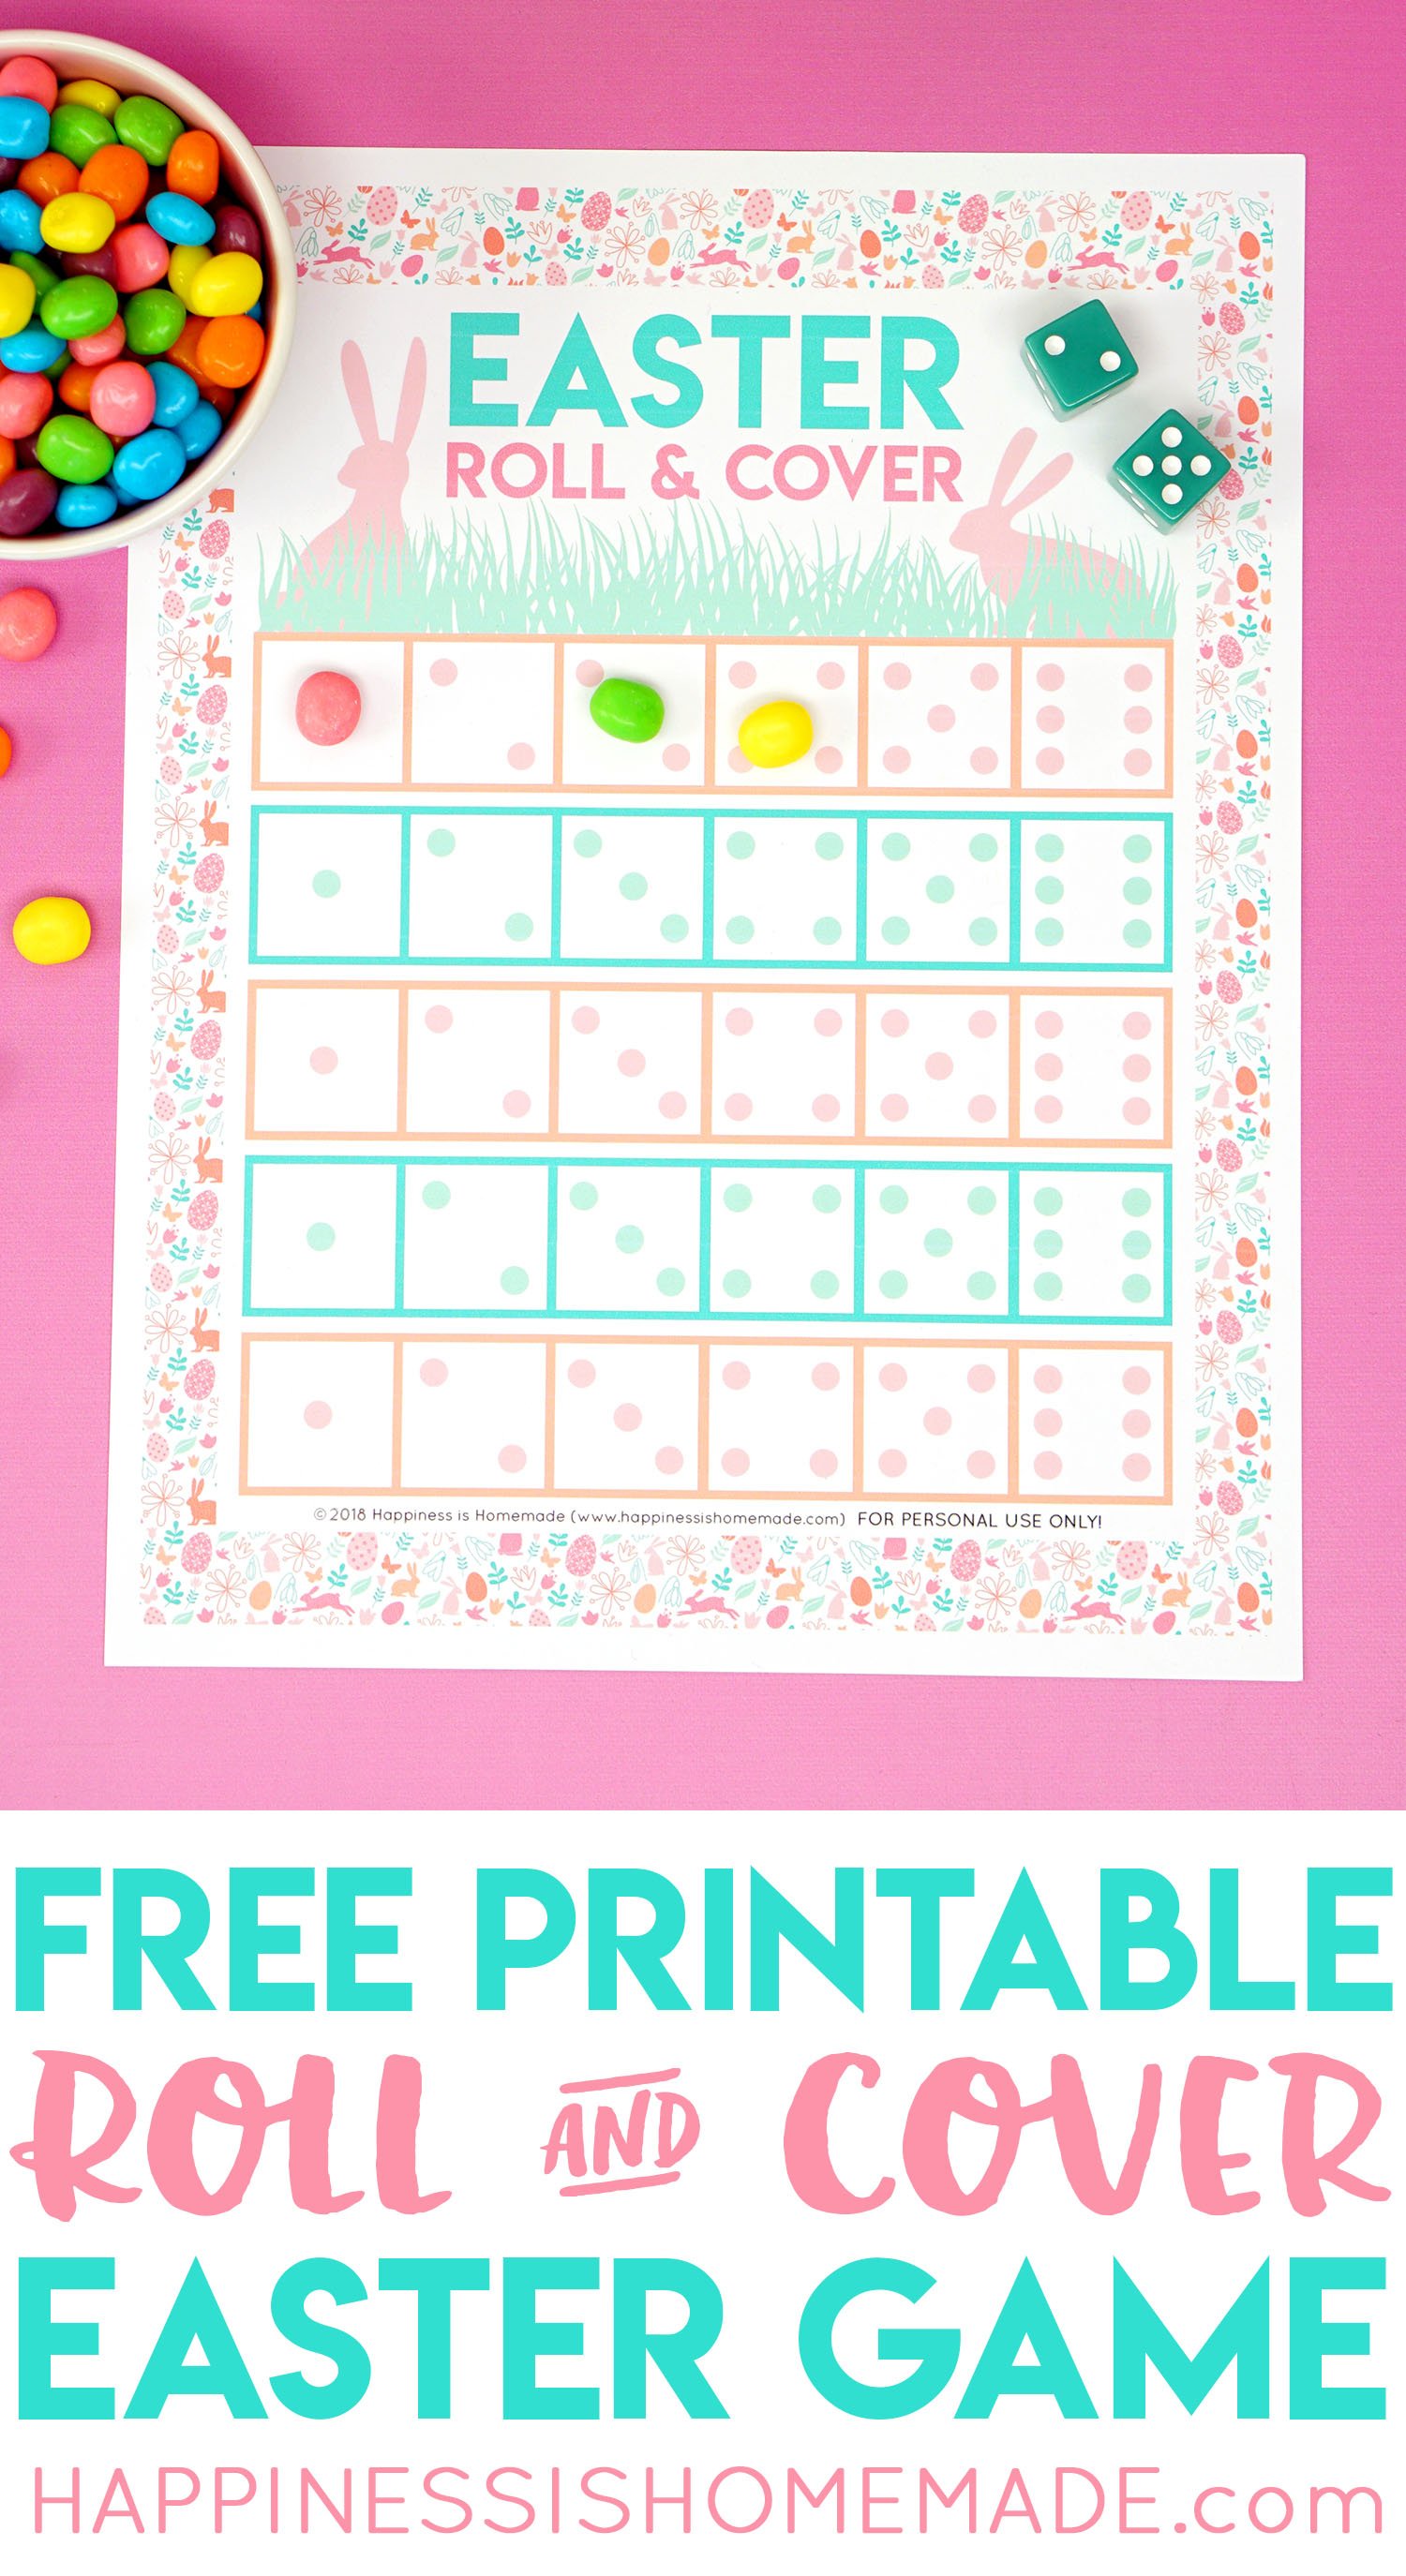 free printable roll and cover easter game